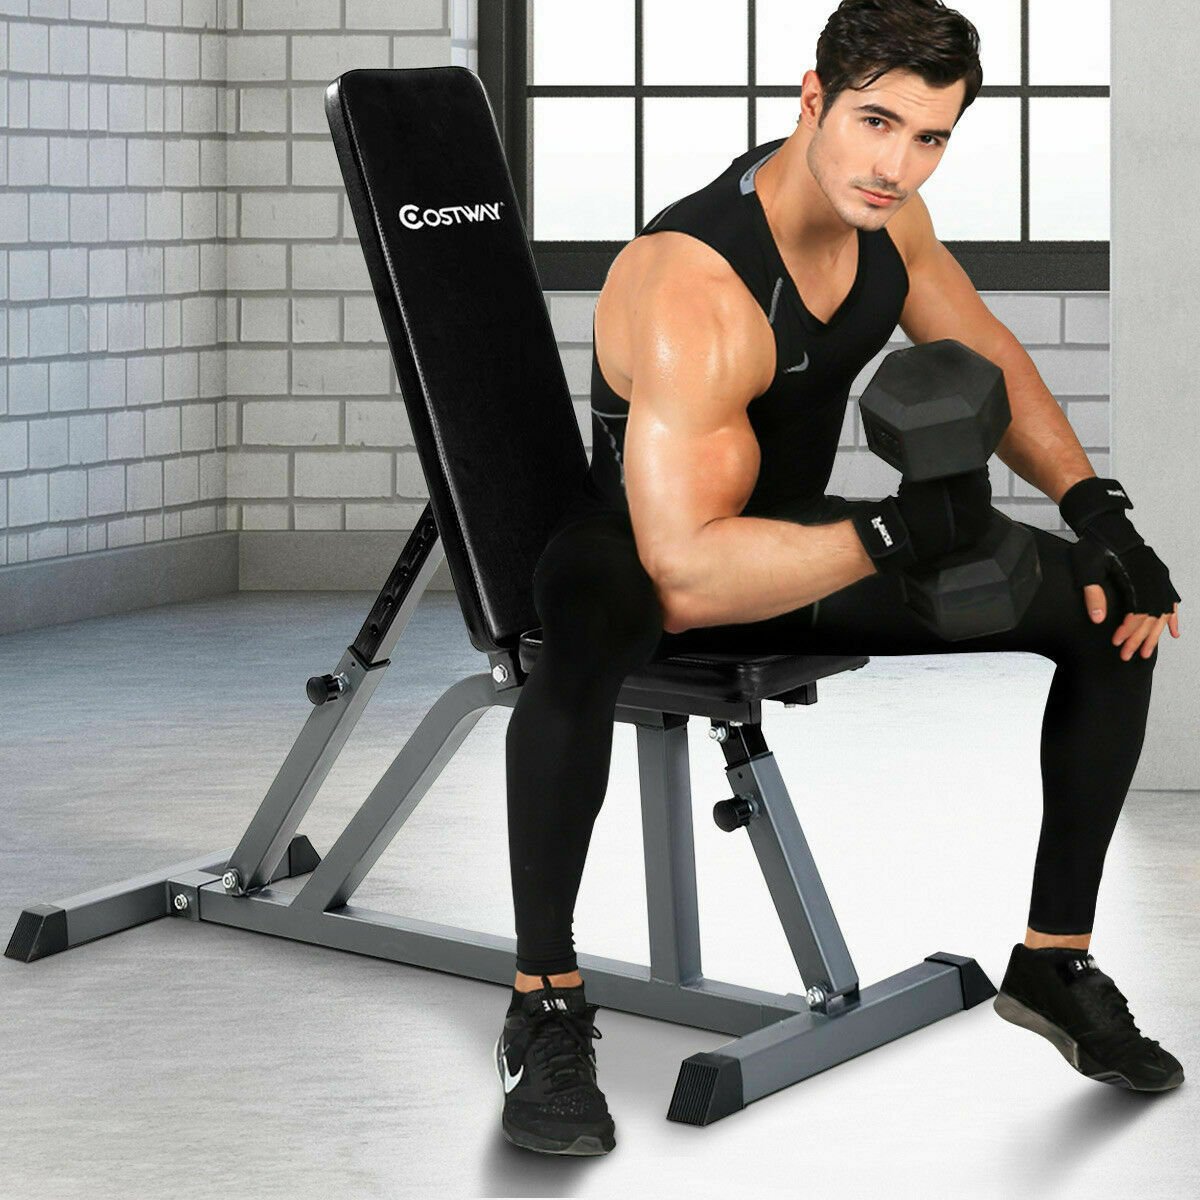 Best Incline bench abs workout for Weight Loss